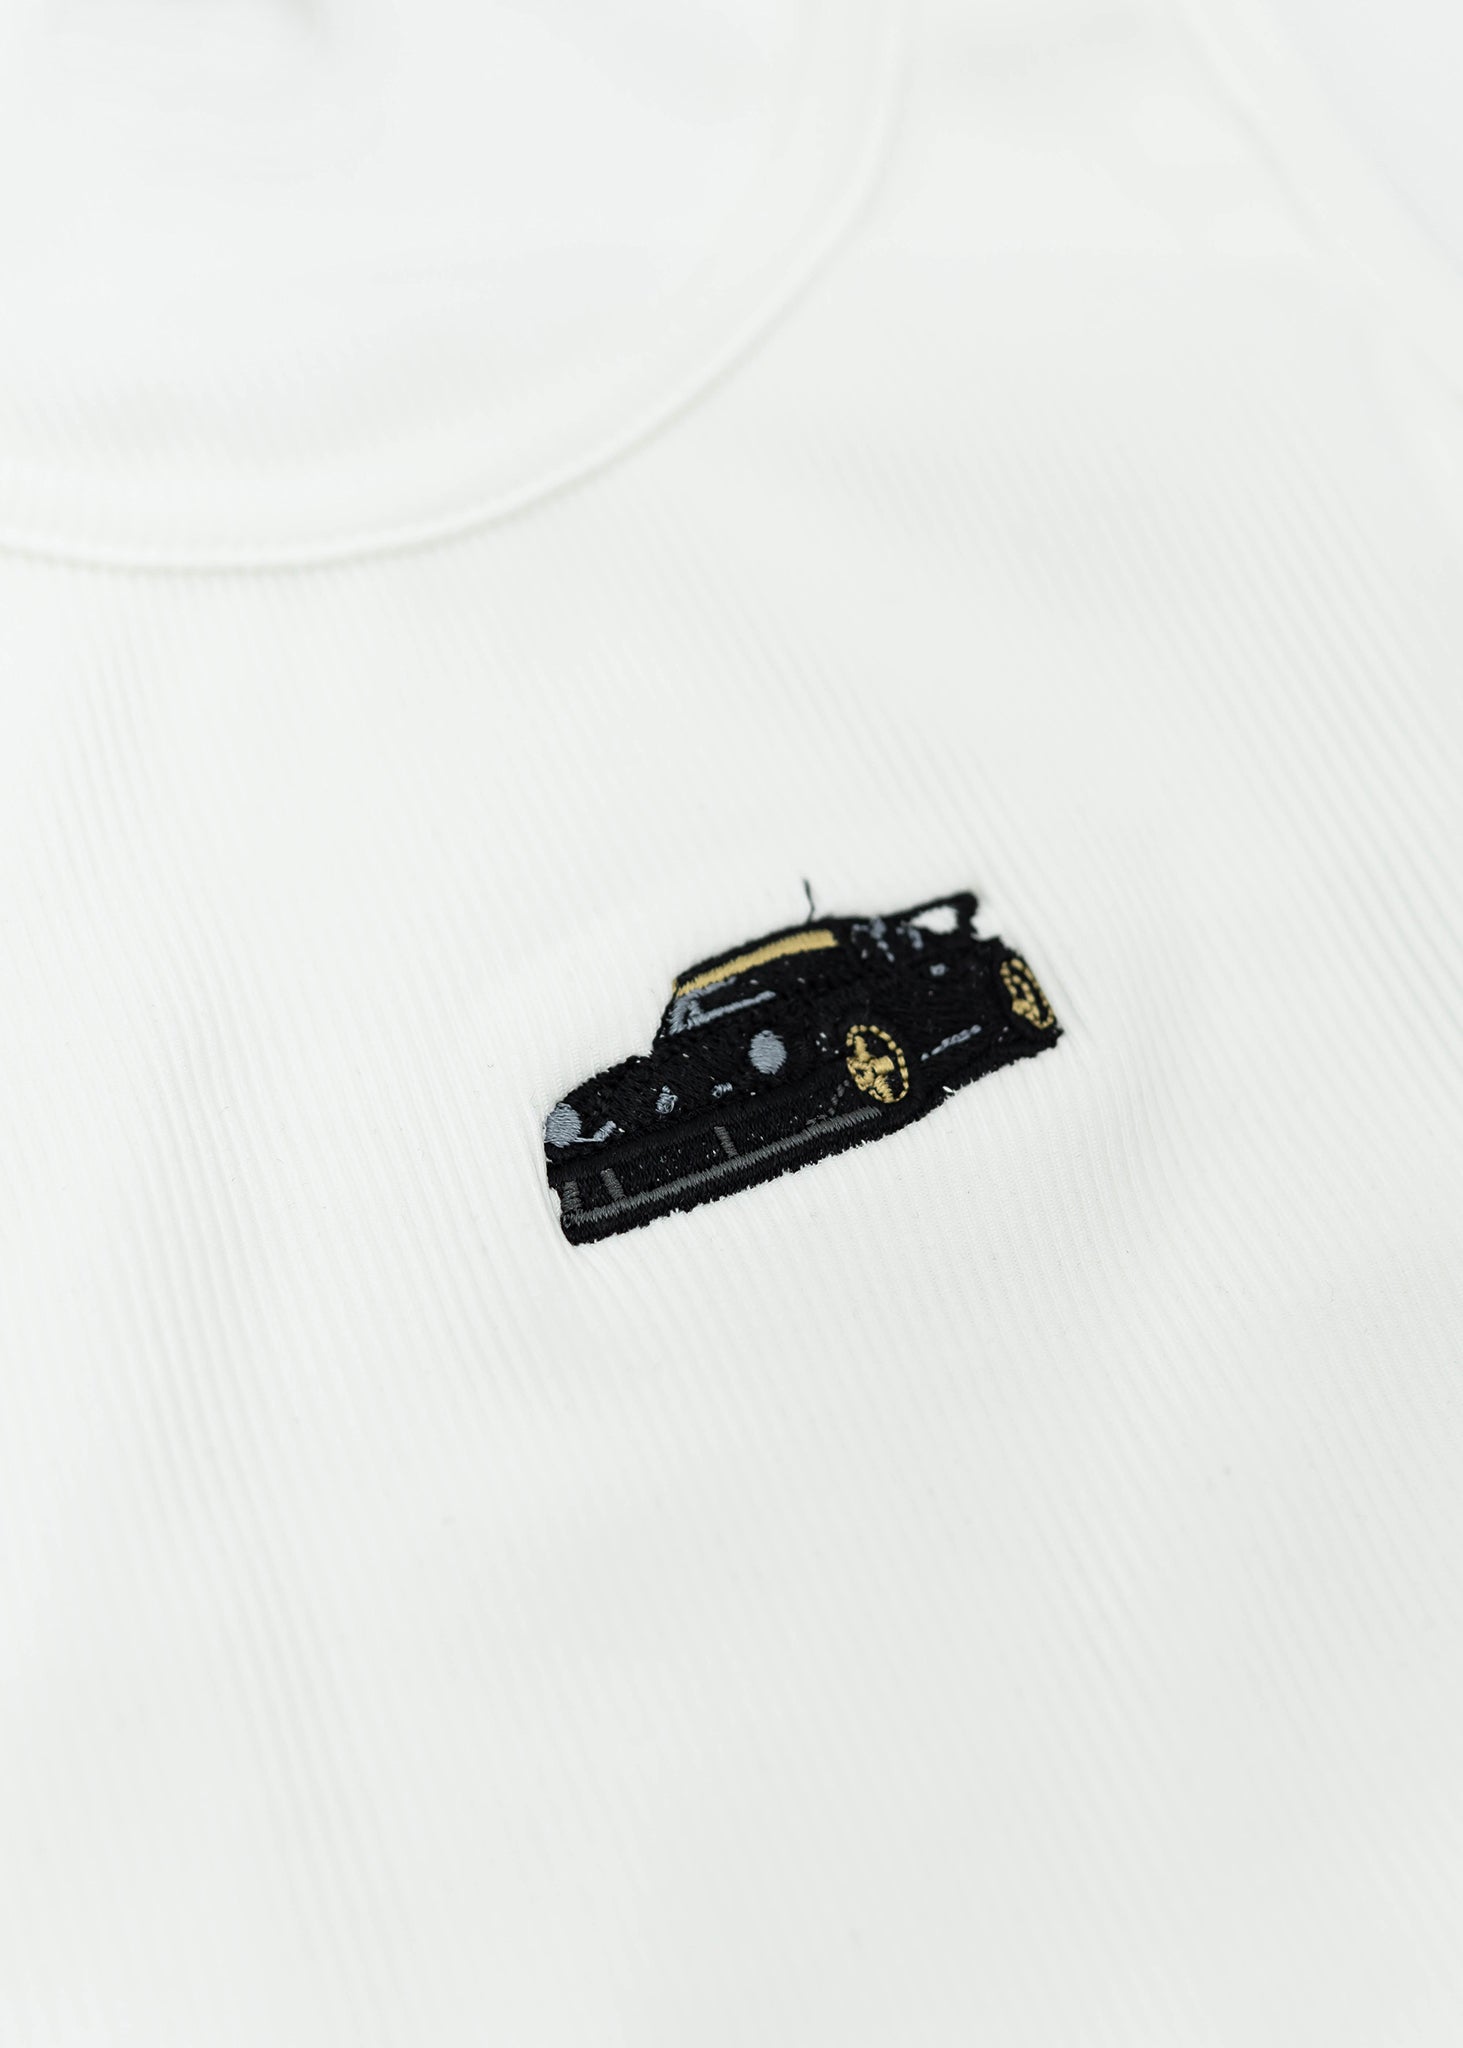 Close up of an embroidered RWB 930 911 Turbo - Akira Nakai "Stella Artois" on a women's high quality ribbed racer back crop top. Photo shows the detailed embroidery of a RWB 930 911 Turbo. Fabric composition of this tee is 95% polyester, and 5% elastane. The material is very stretchy, and form fitting. The style of this shirt is scoop neck, sleeveless, cropped at the waist, with embroidery in the middle.